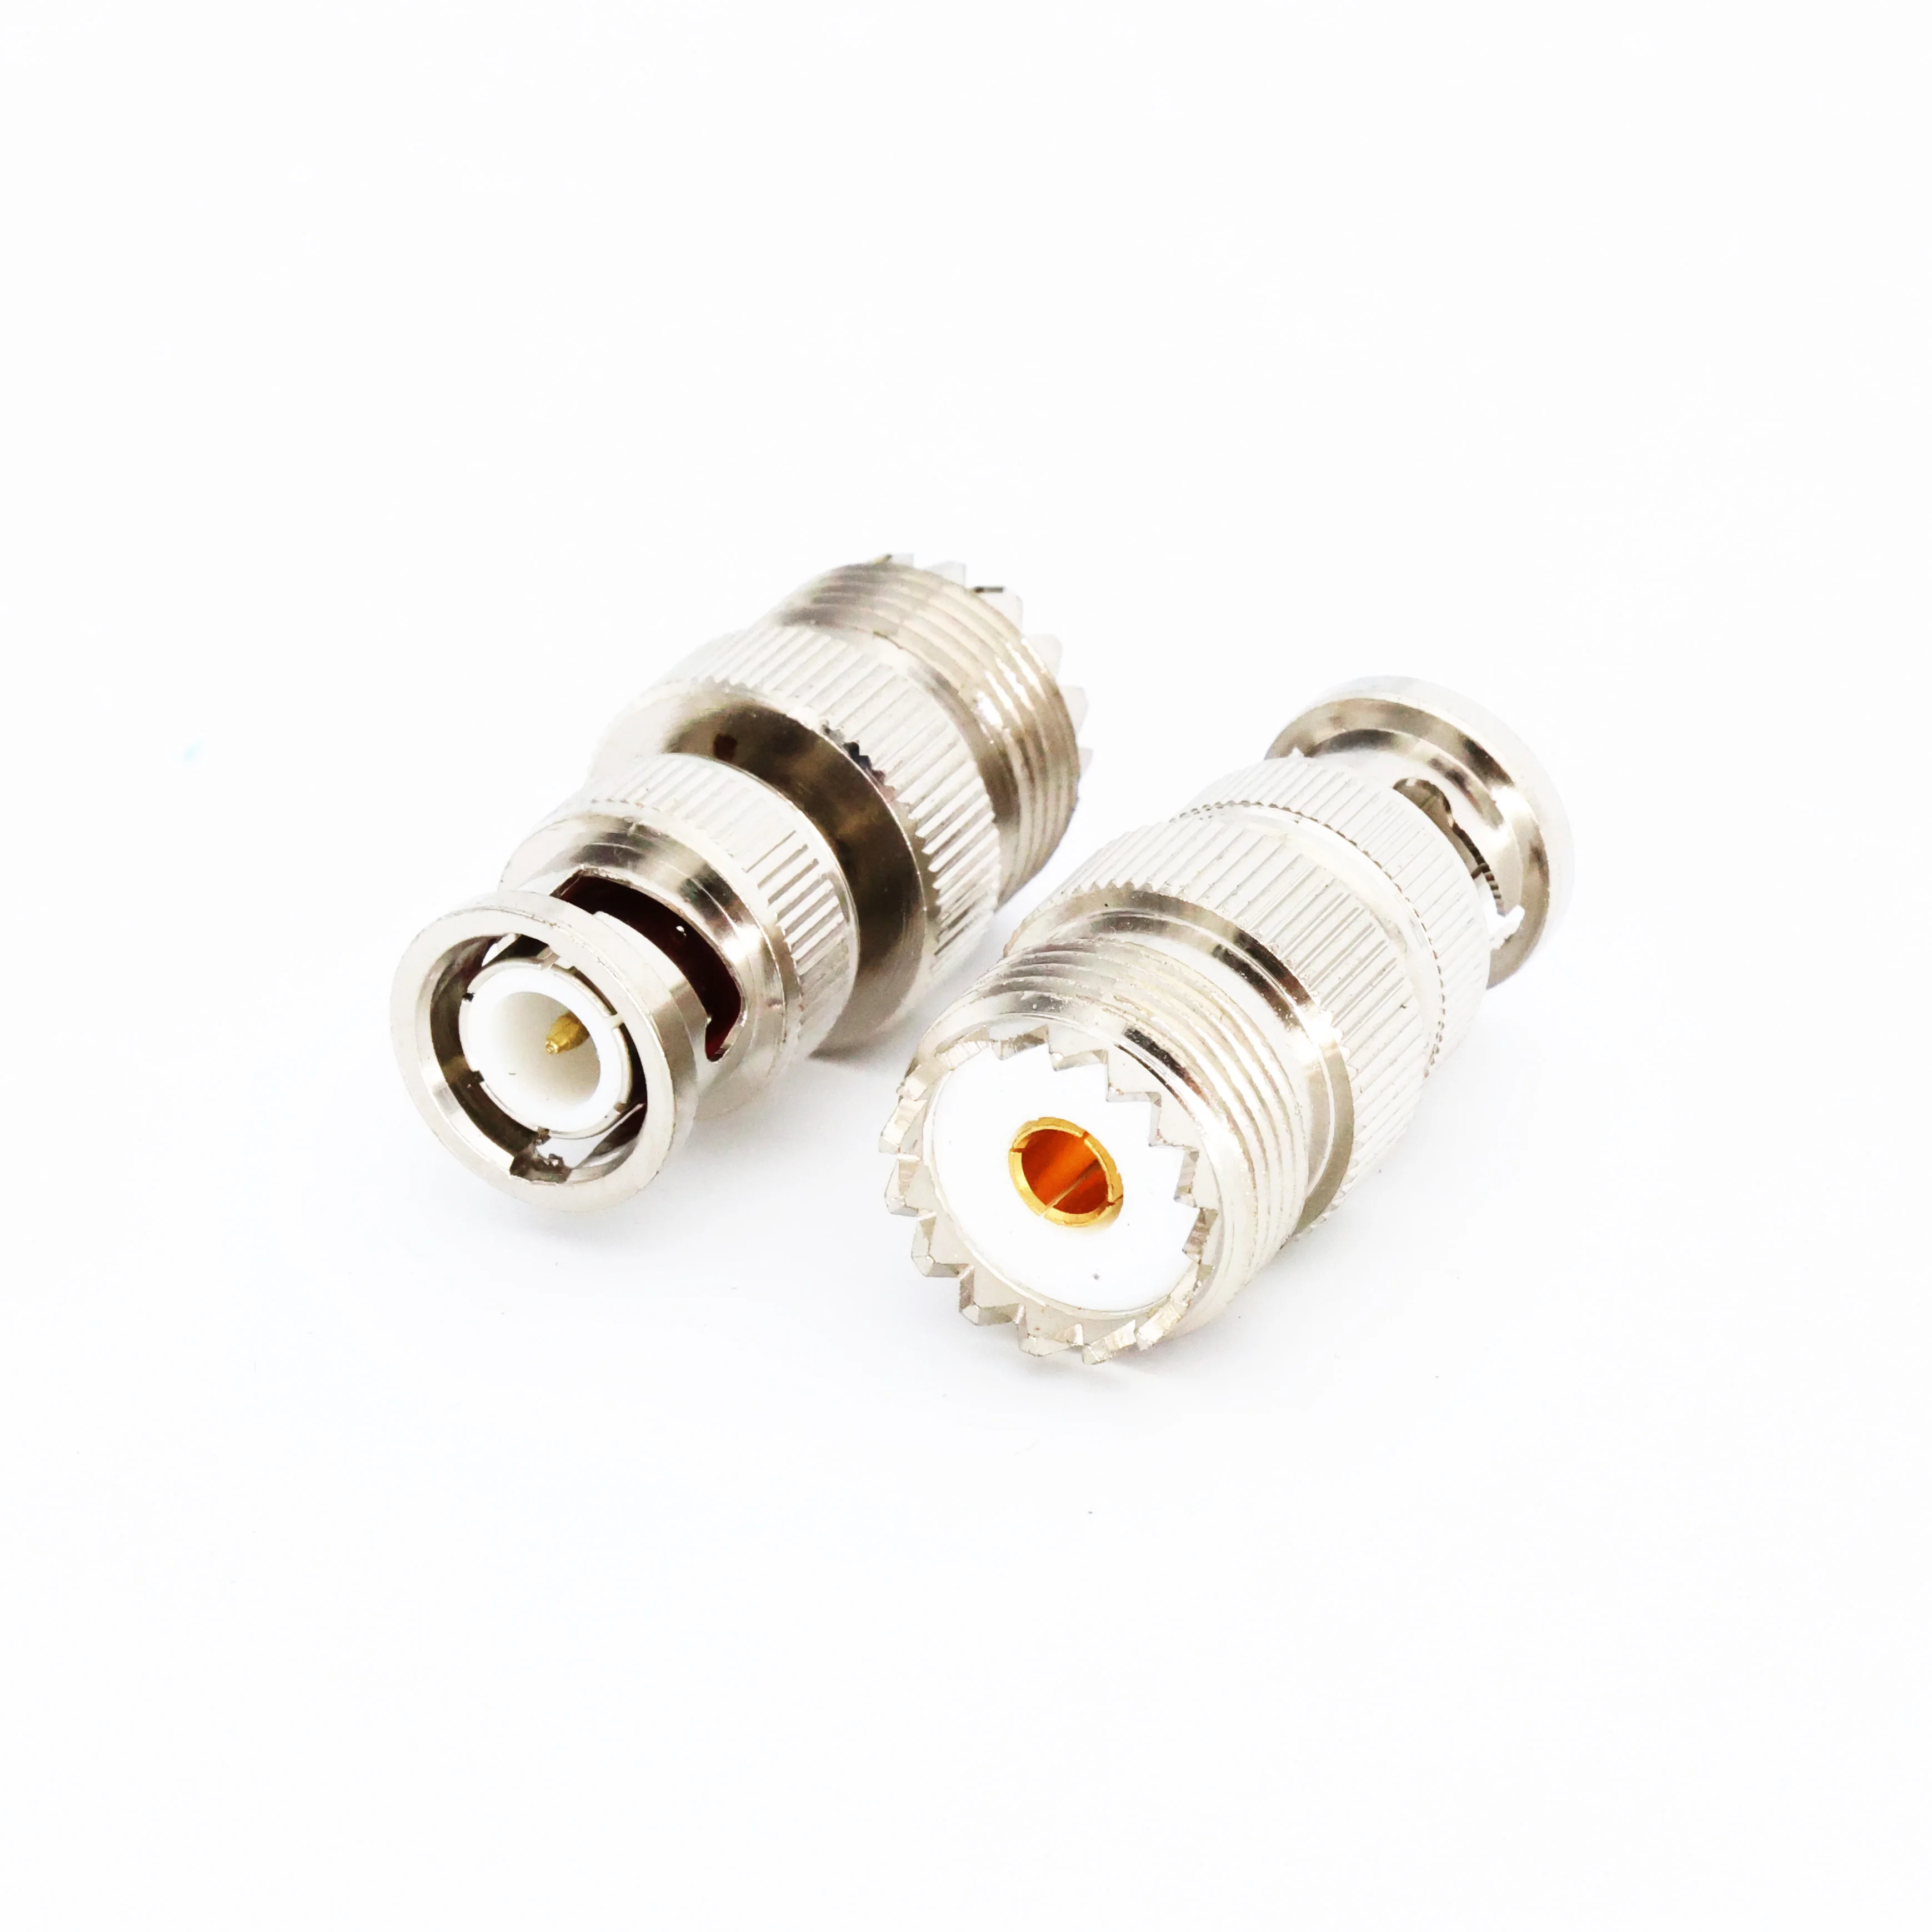 2pcs Cleqee BNC Male to UHF SO239 PL-259 Female RF Coaxial Adapter BNC to UHF Coax Jack Connector